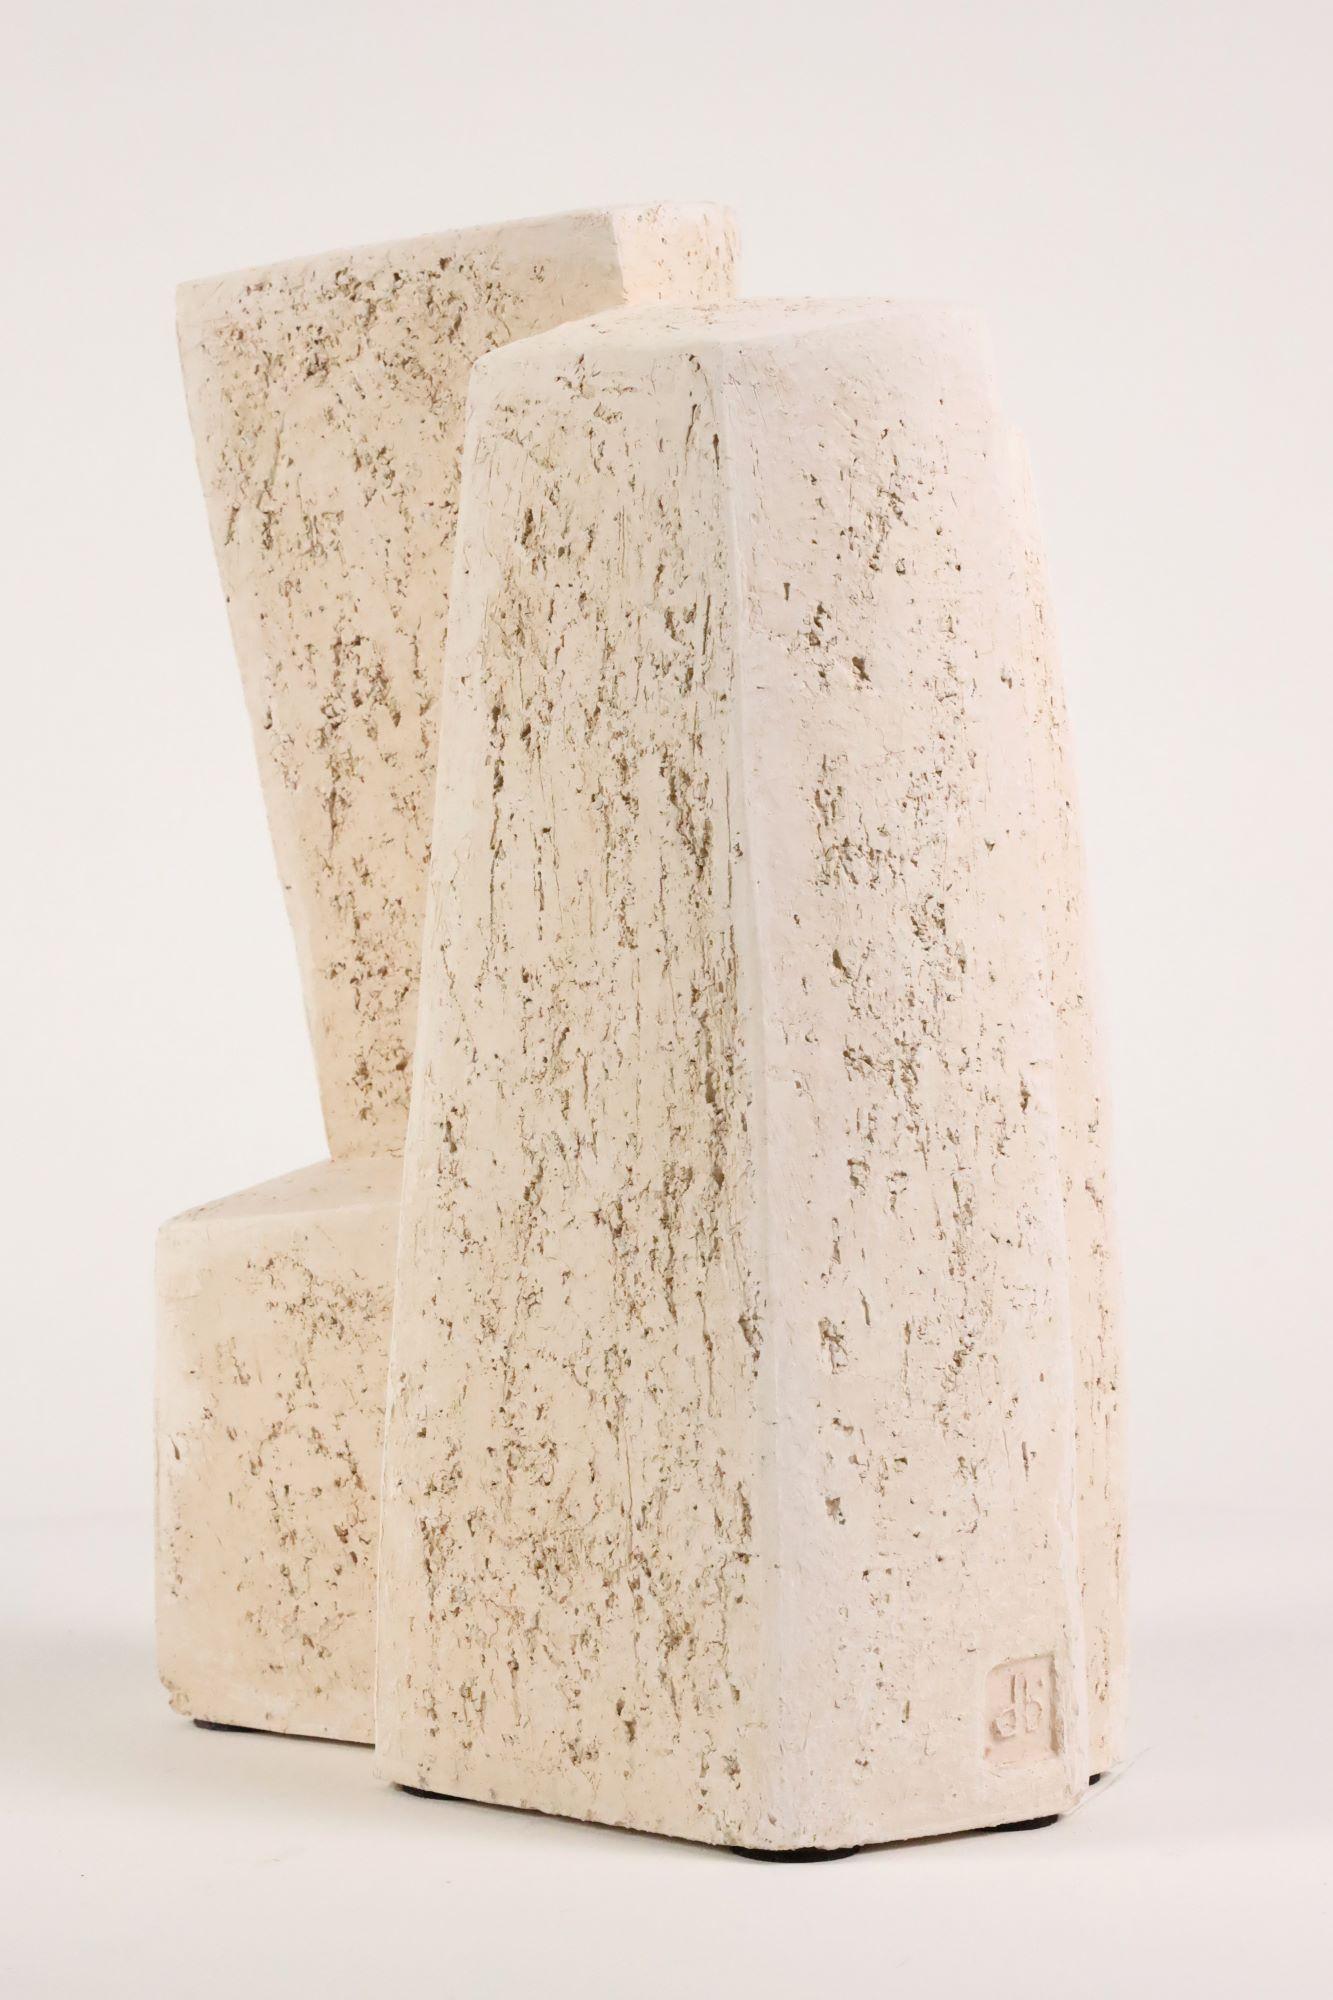 Union V by Delphine Brabant - Abstract geometric sculpture, terracotta, white For Sale 4